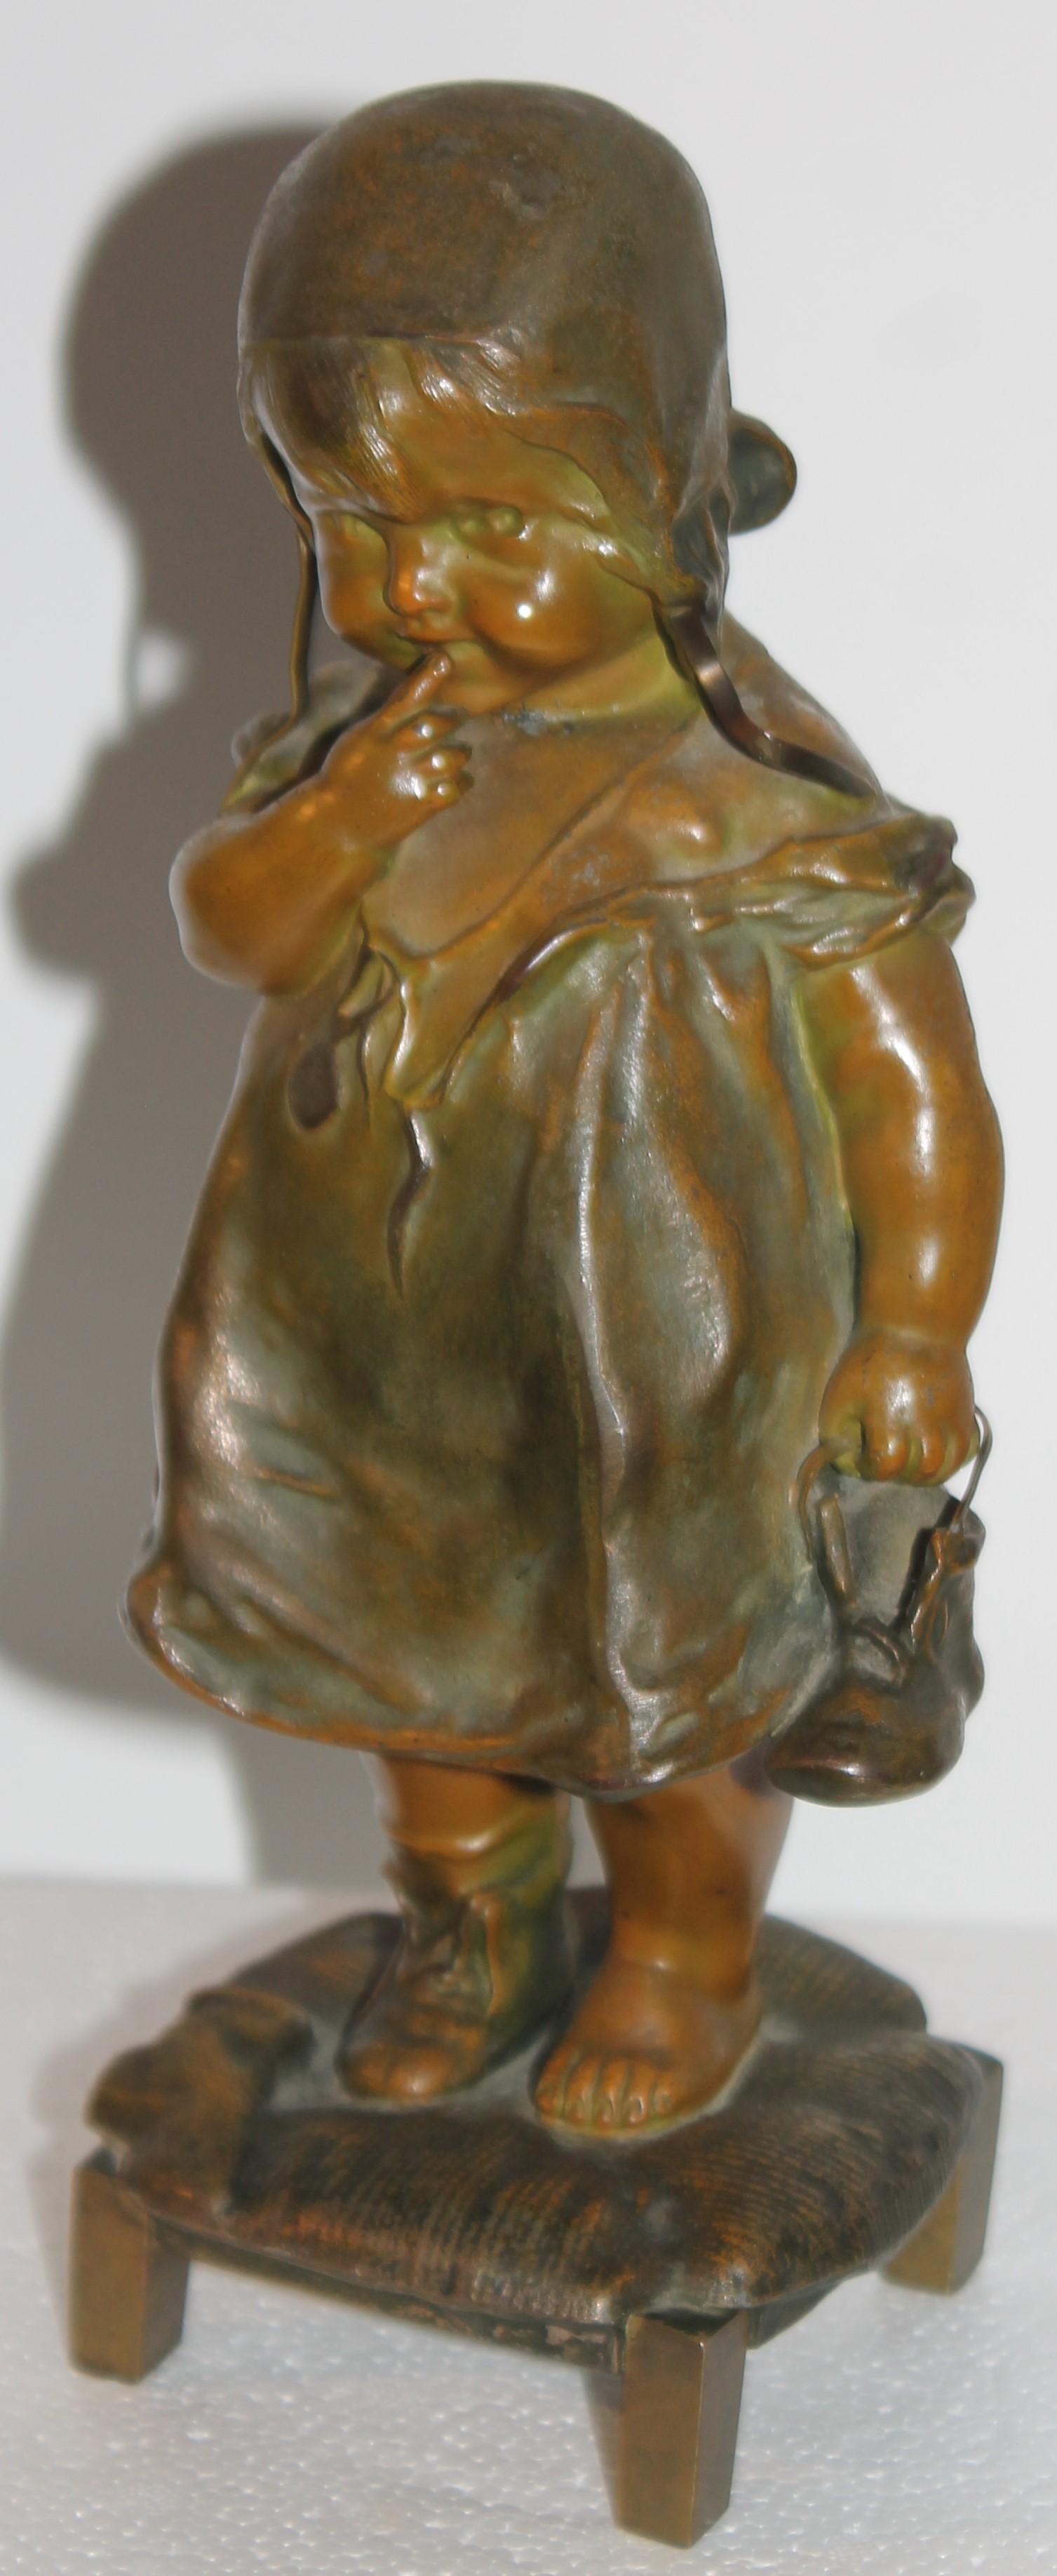 Juan Clara Art Noveau girl on stool sculpture holding shoe in hand. This bronze has great weight and a great look. The sculpture of the young girl is holding a shoe in one hand while the opposite foot has the shoe on. She is standing on a stool and